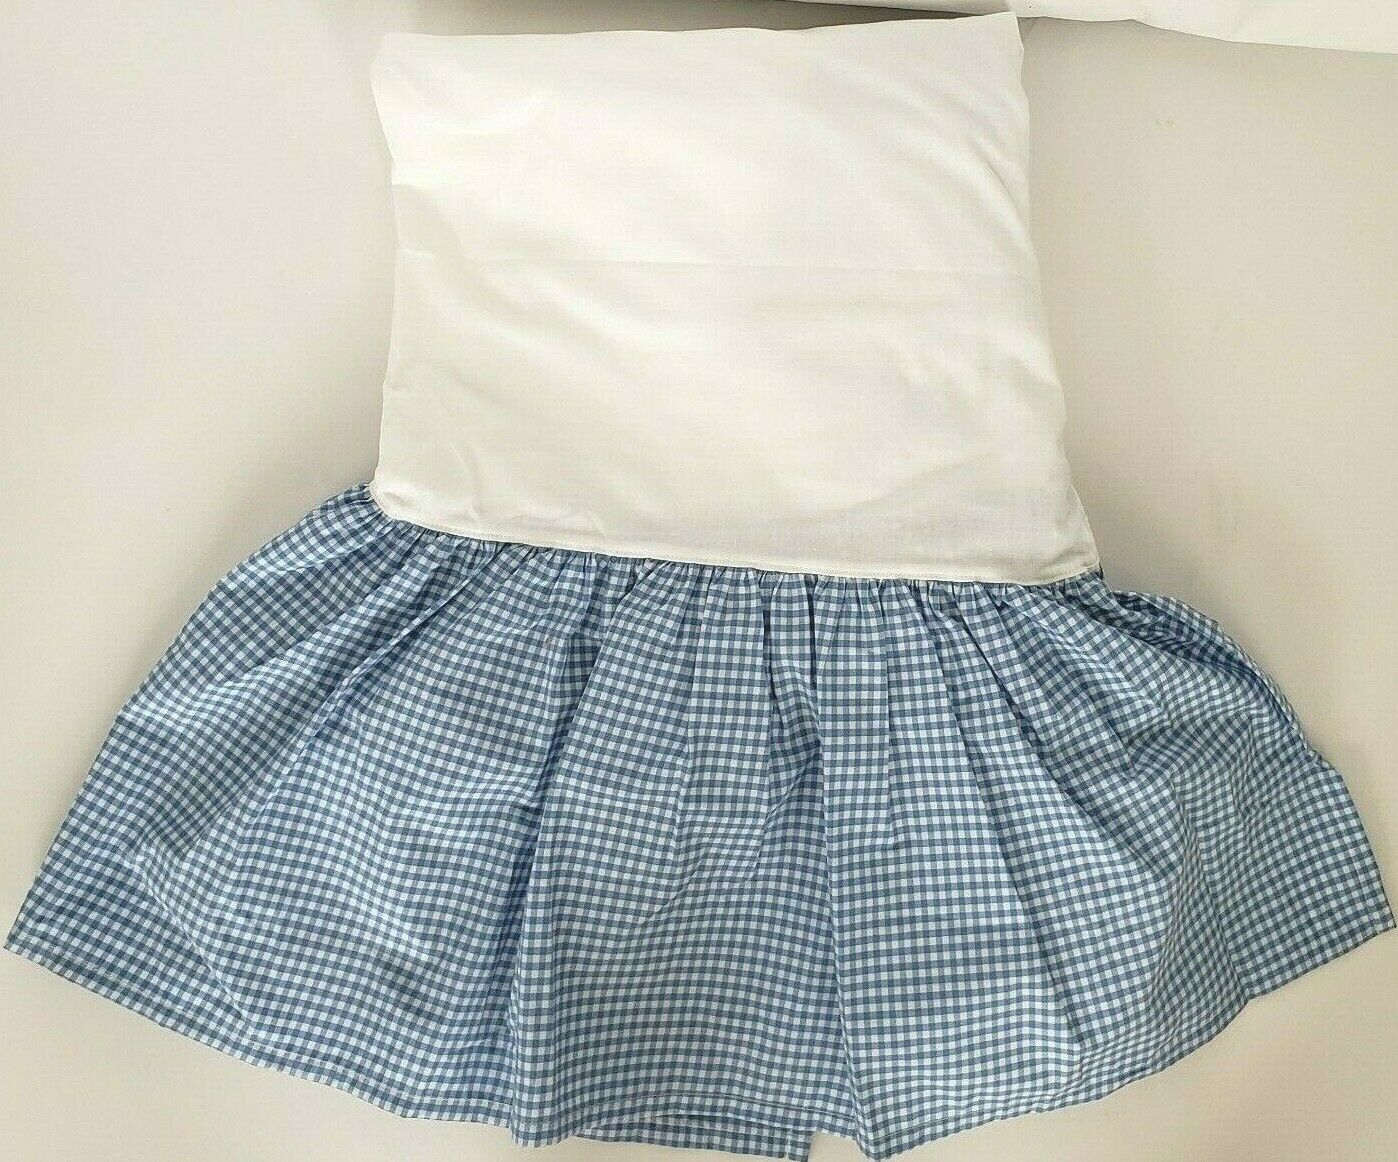 New W/tags Pottery Barn Kids Blue Gingham Ruffle Crib Skirt One Size